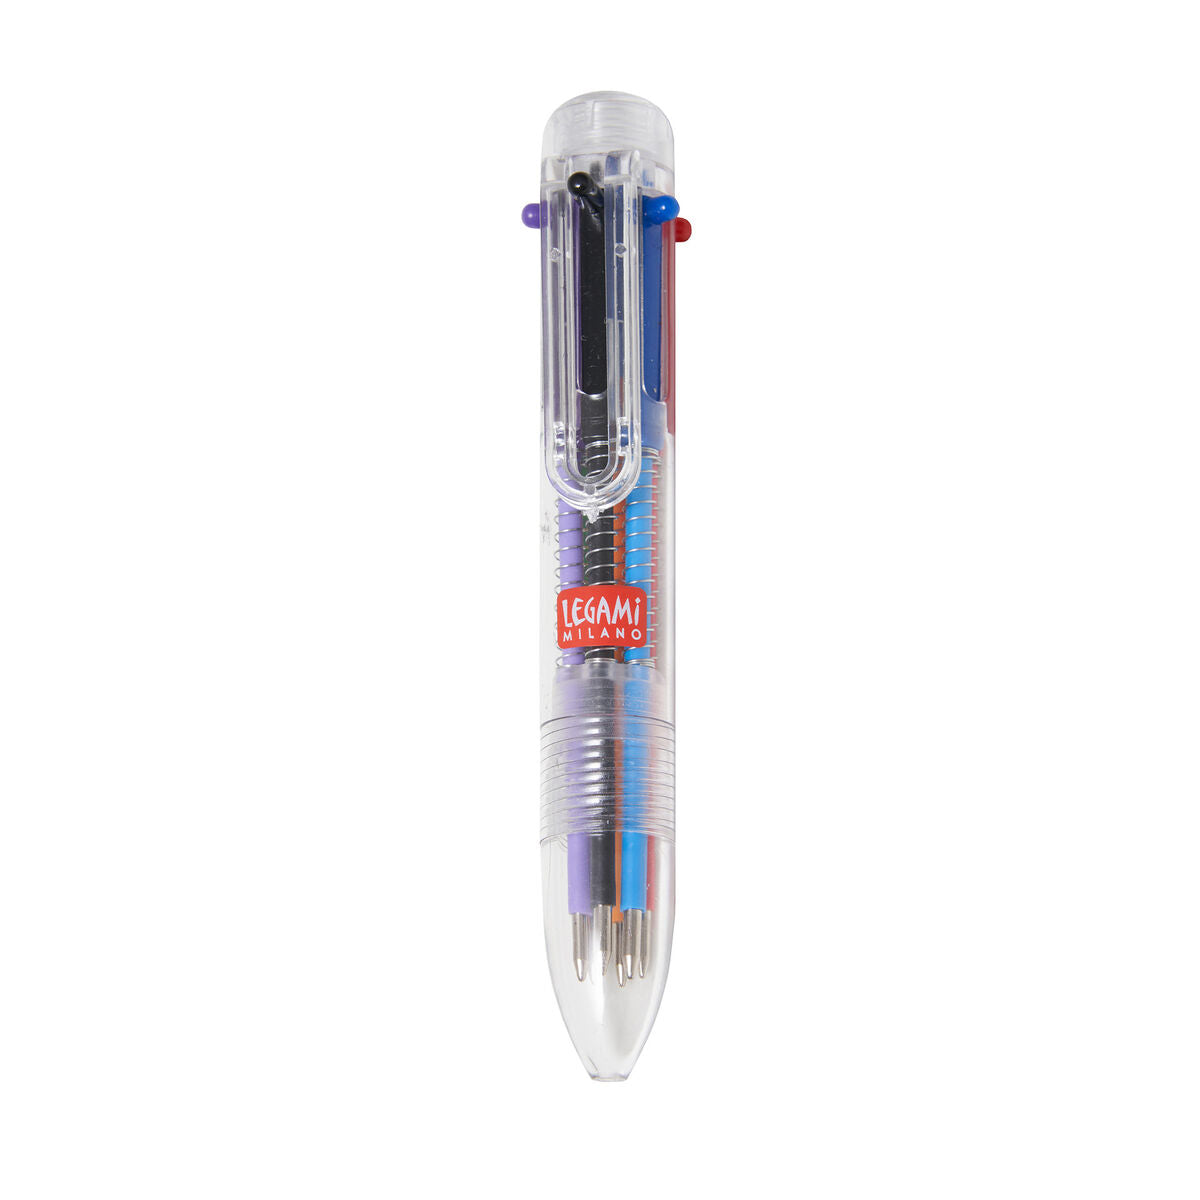 Fab Gifts | Legami Magic Rainbow - 6-Color Ballpoint Pen by Weirs of Baggot Street